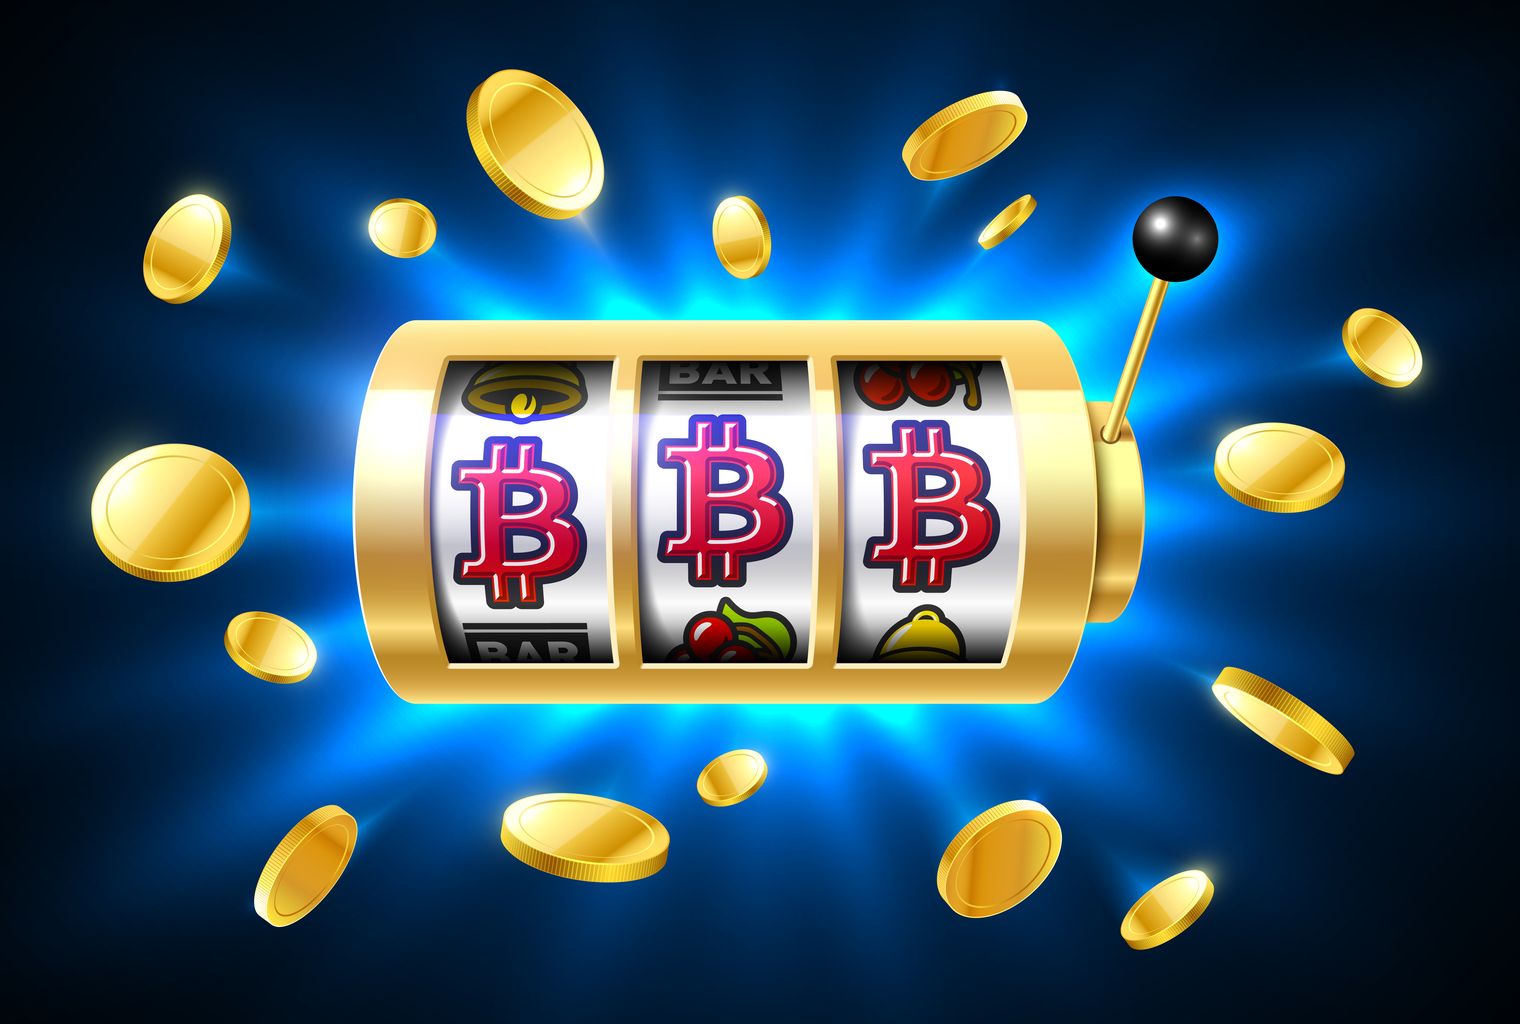 Free slots play as guest free tokens